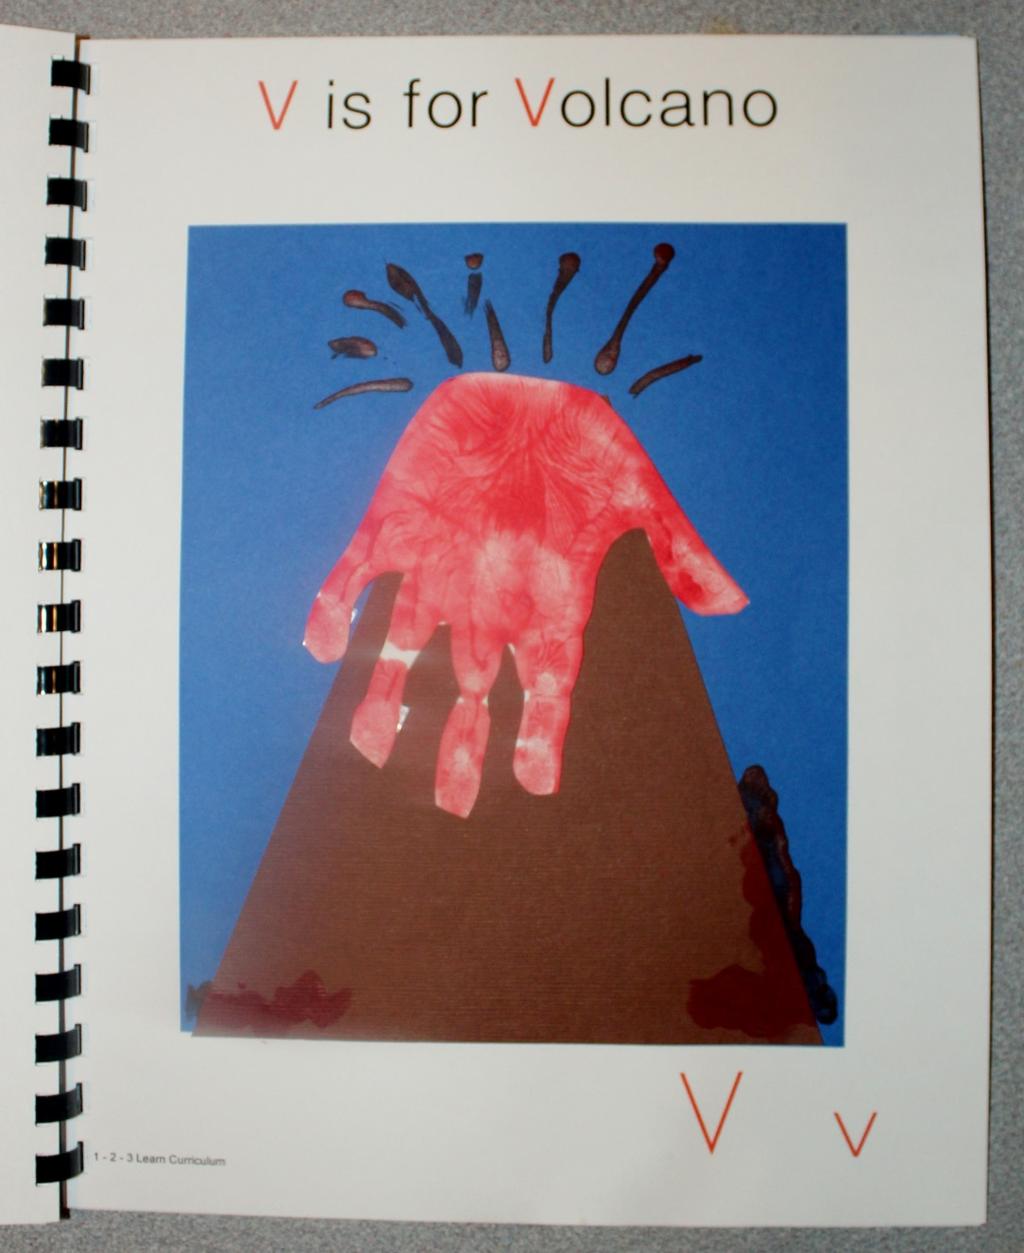 V is for Volcano Paint the child s hand red and place on white card stock. Cut out a volcano out of brown card stock and attach it to a piece of blue card stock.